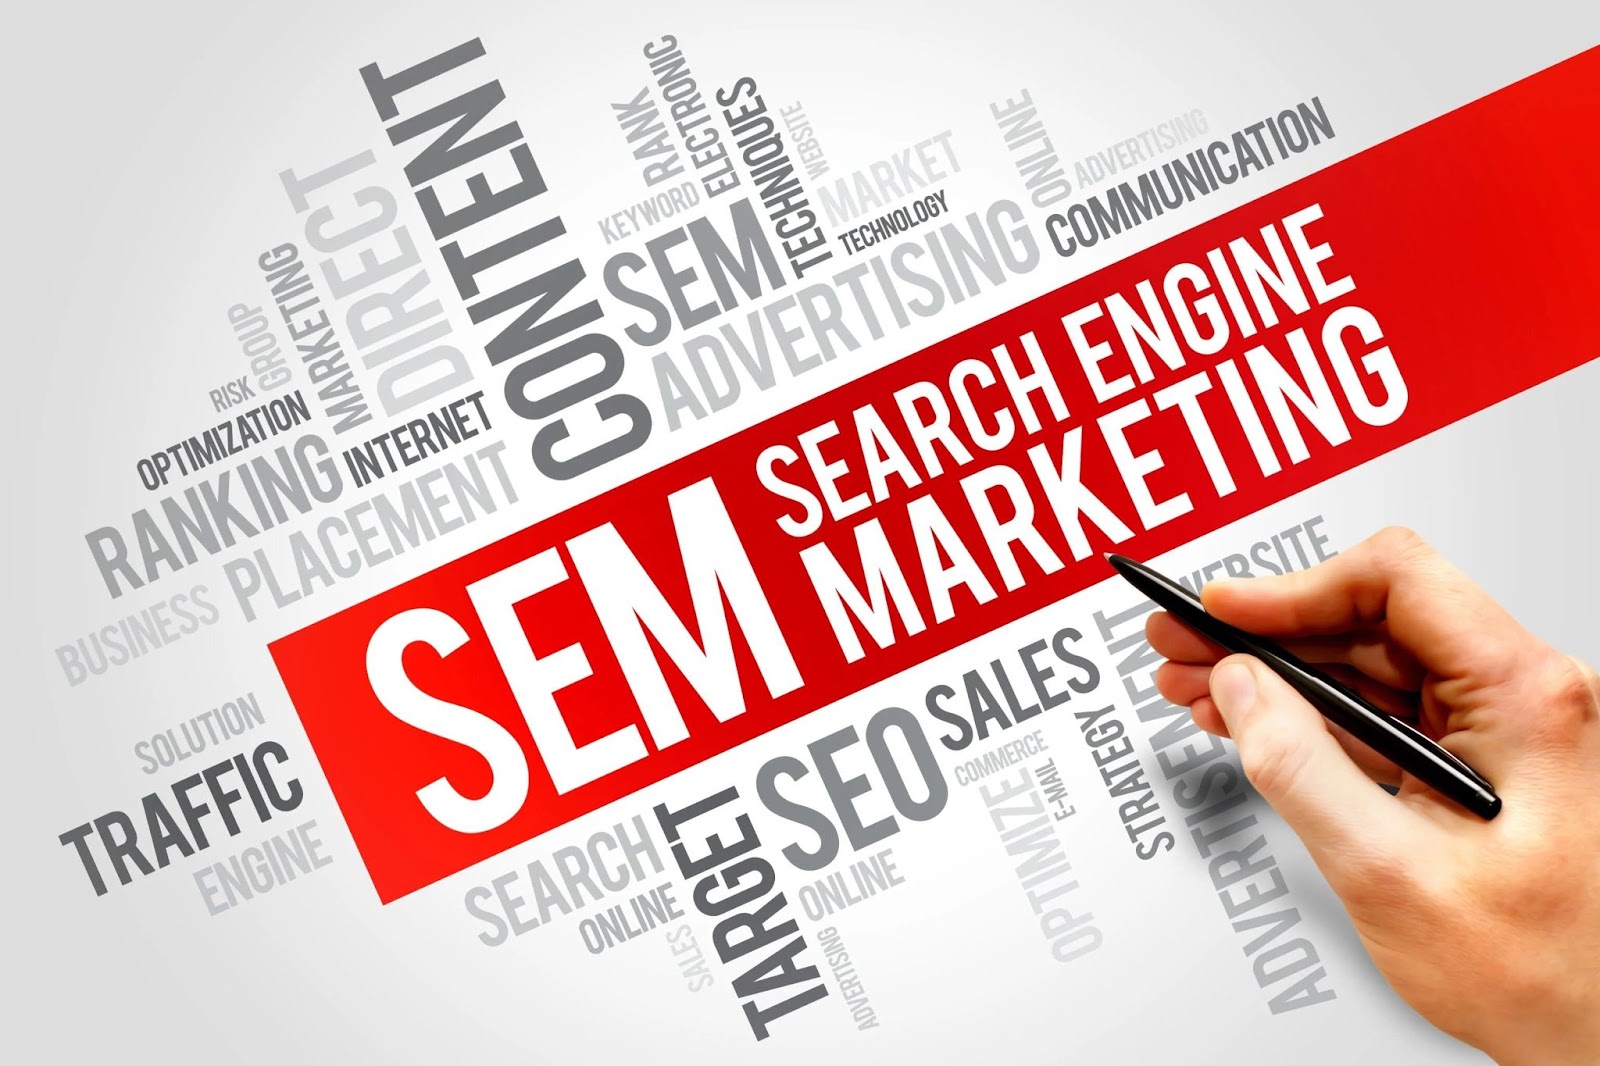 IM Solutions: Top Search Engine Marketing Agency offers cost-effective PPC Campaigns. Our SEM services can help your organization to get ROI. Best Search Engine Marketing Company.

